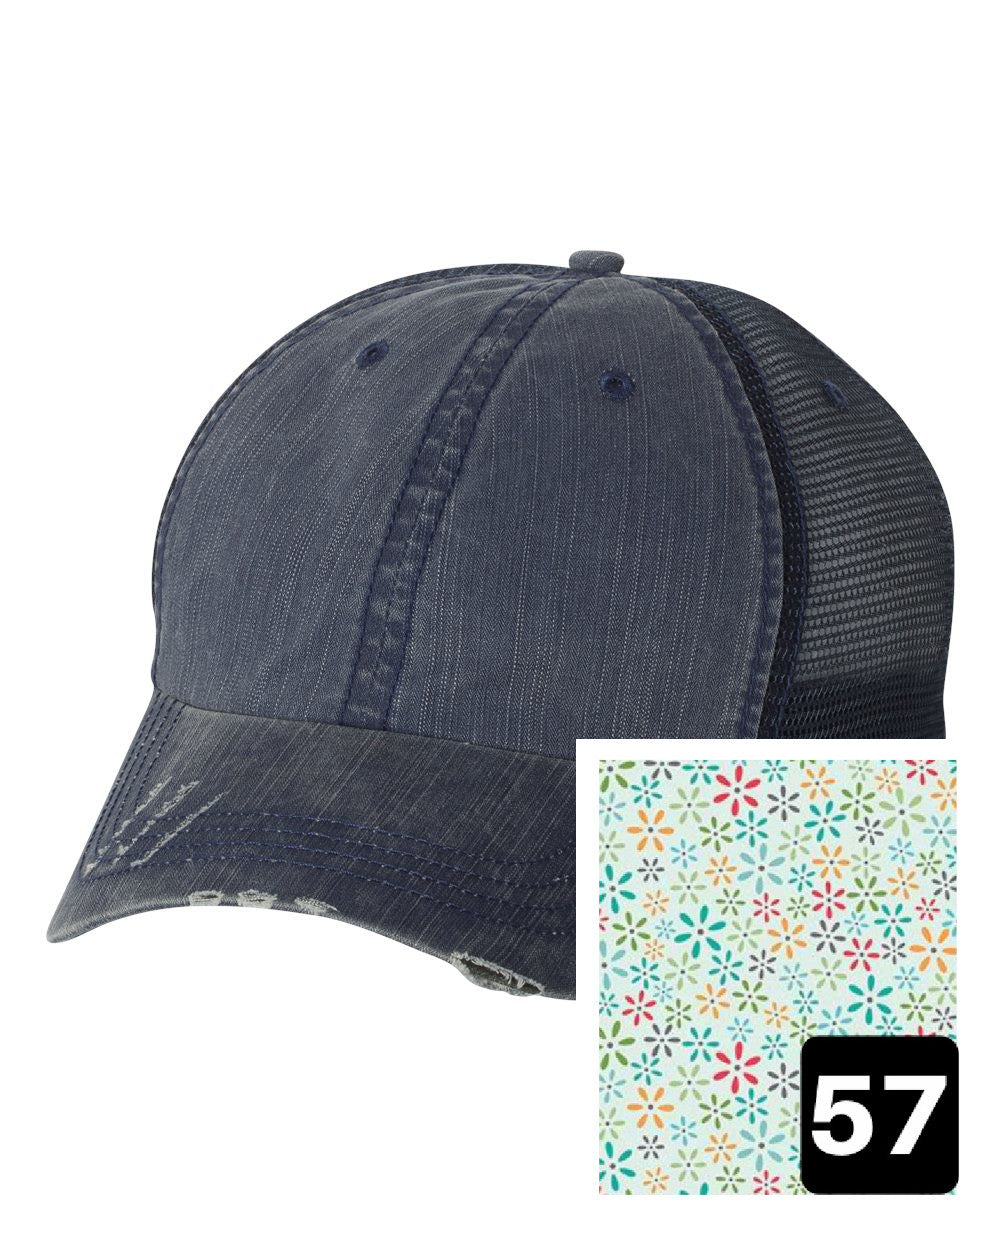 Delaware Hat | Navy Distressed Trucker Cap | Many Fabric Choices